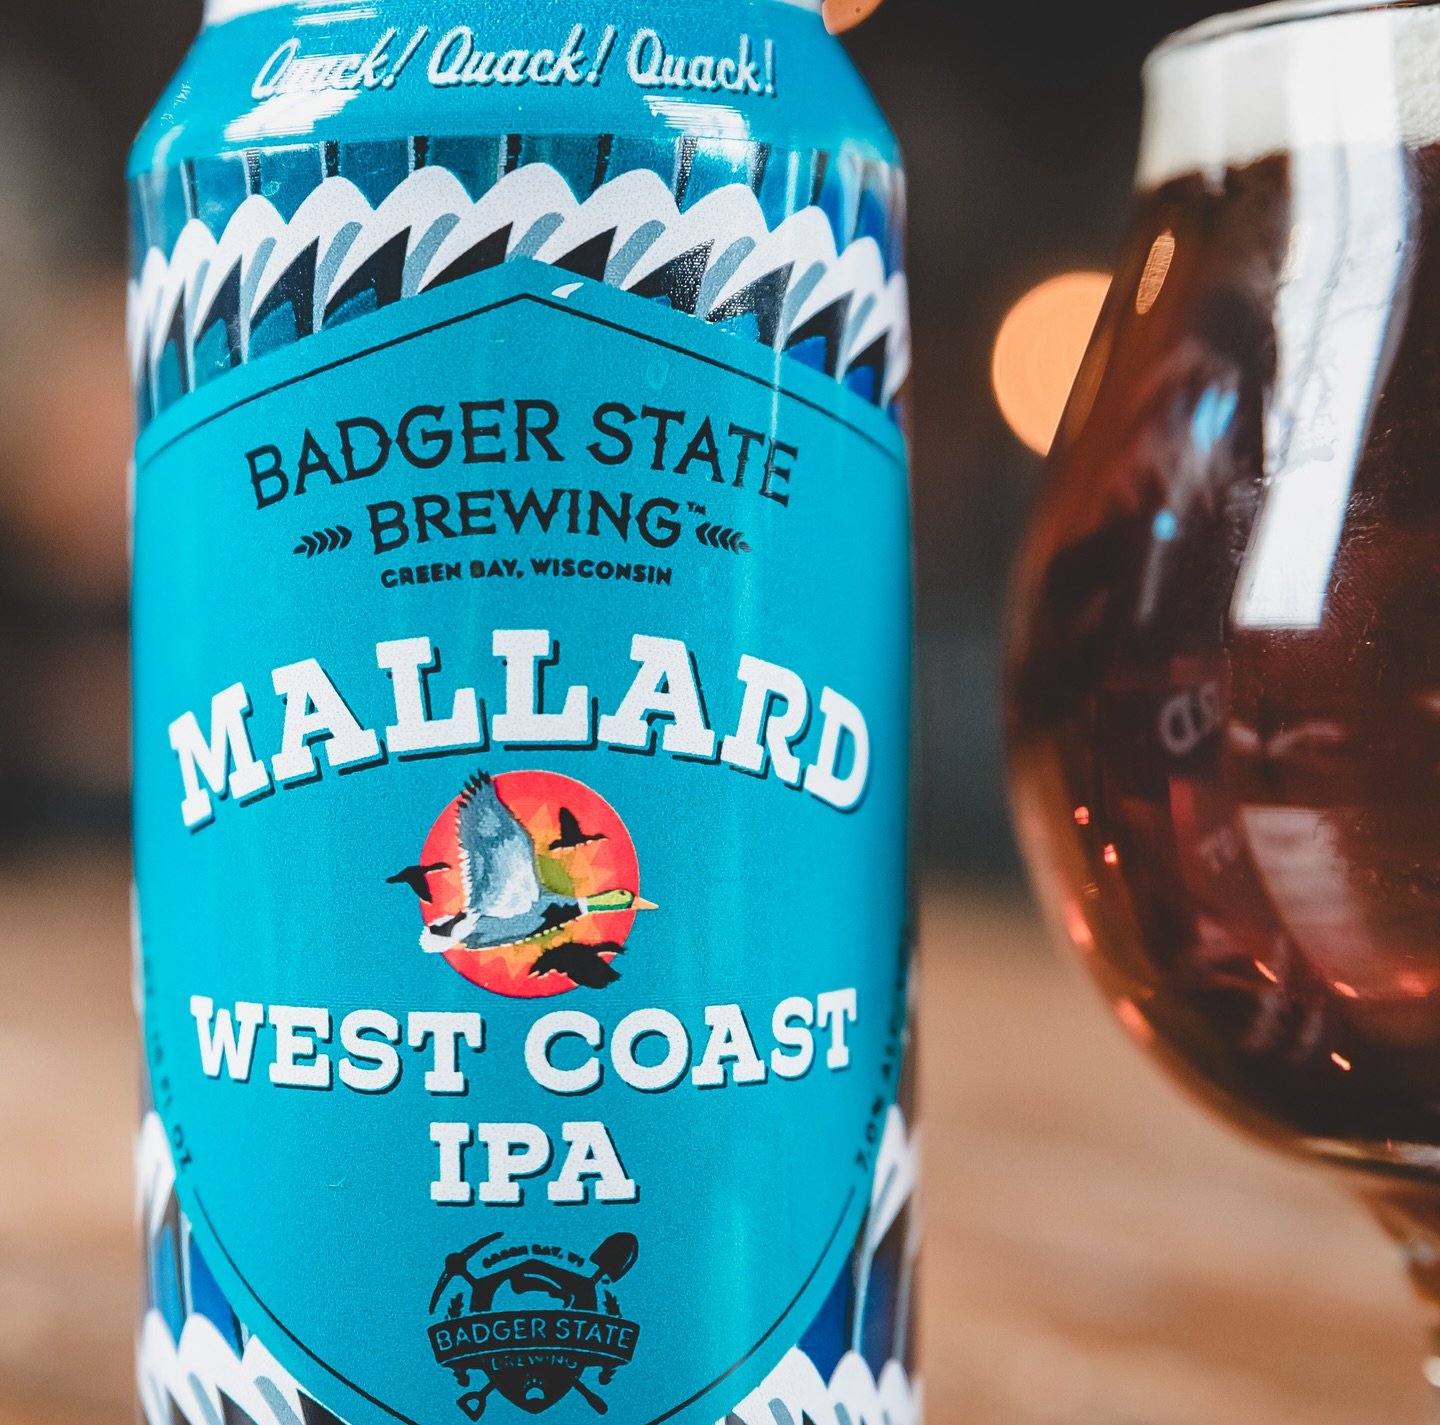 Duck Duck there! Mallard West Coast IPA hitting shelves today and headed to statewide distribution. Trust us when we say this West Coast style creation hits different than others you&rsquo;ve had. Some details for those who care to nerd out a little 